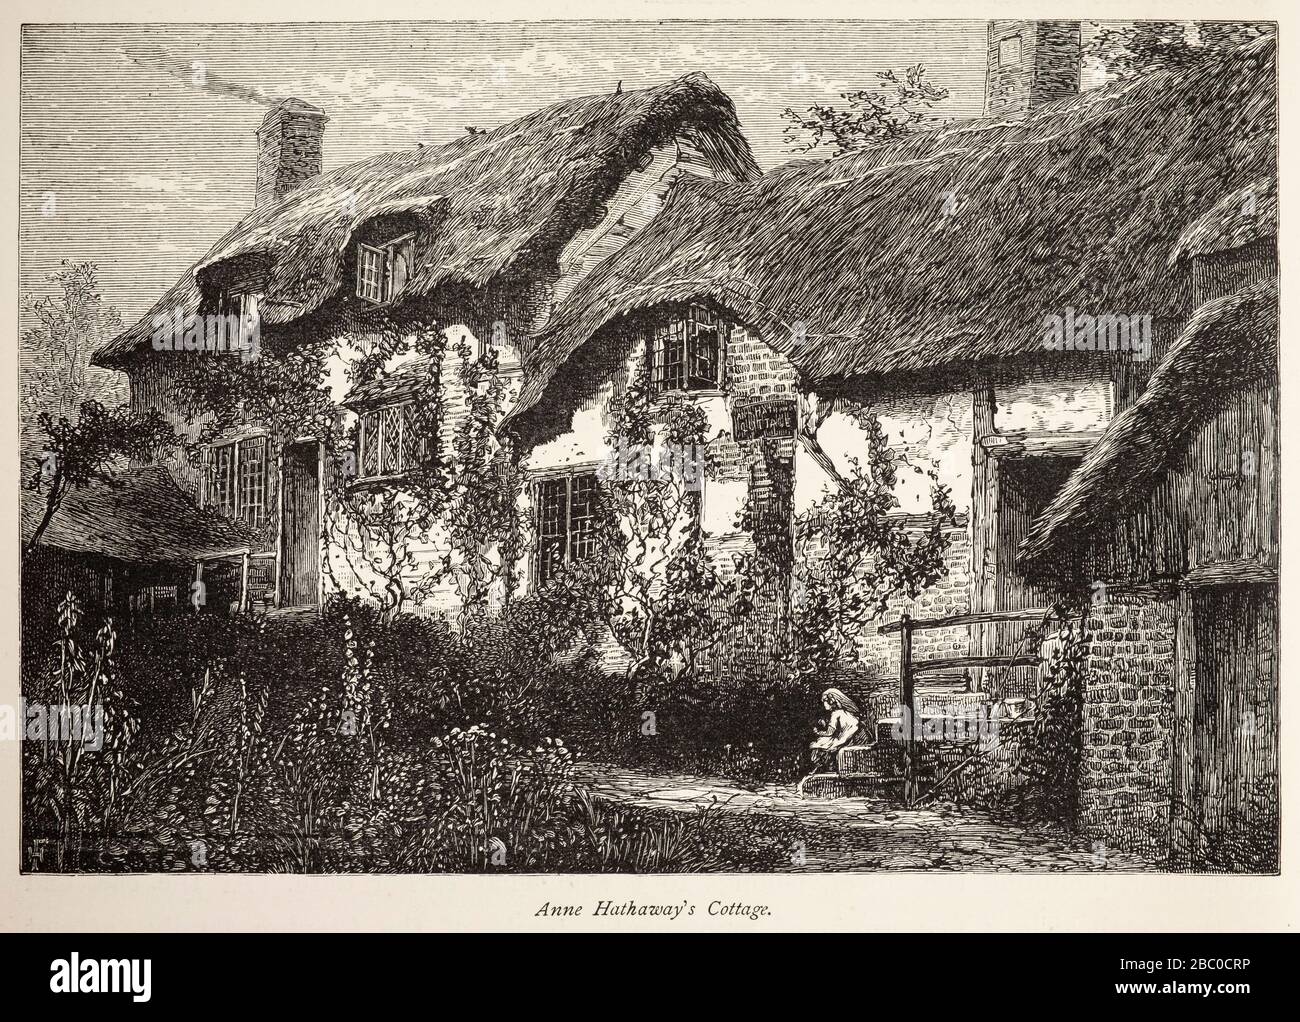 Antique 19th century engraving of Anne Hathaway's Cottage in Sottery near Stratford-upon-Avon, Warwickshire, UK Stock Photo